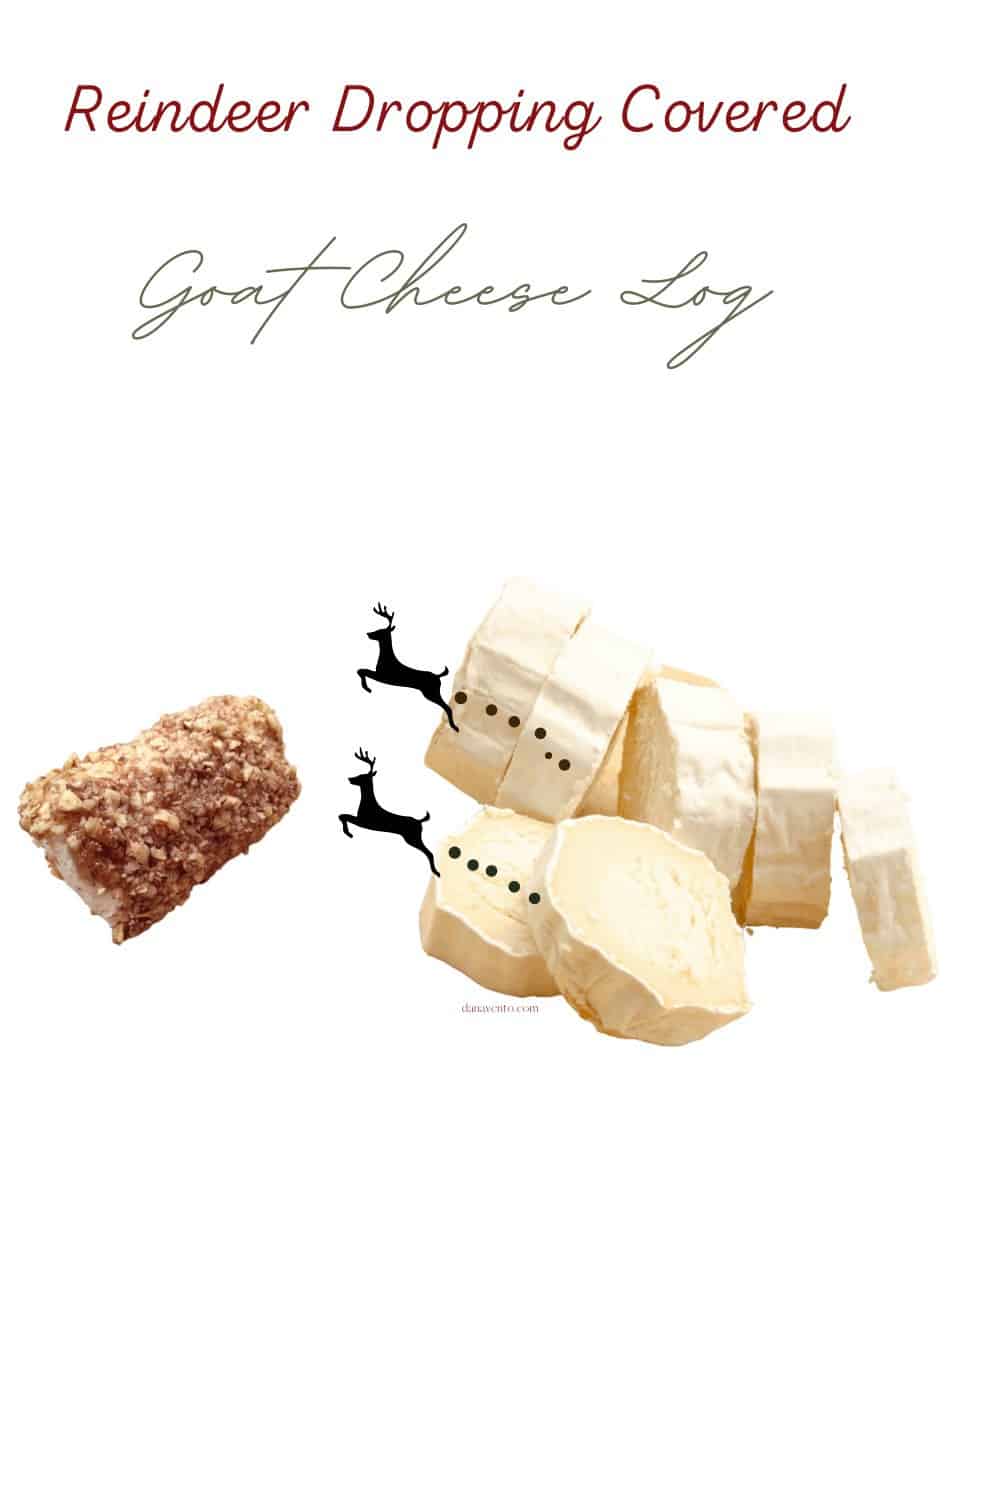  goat cheese 